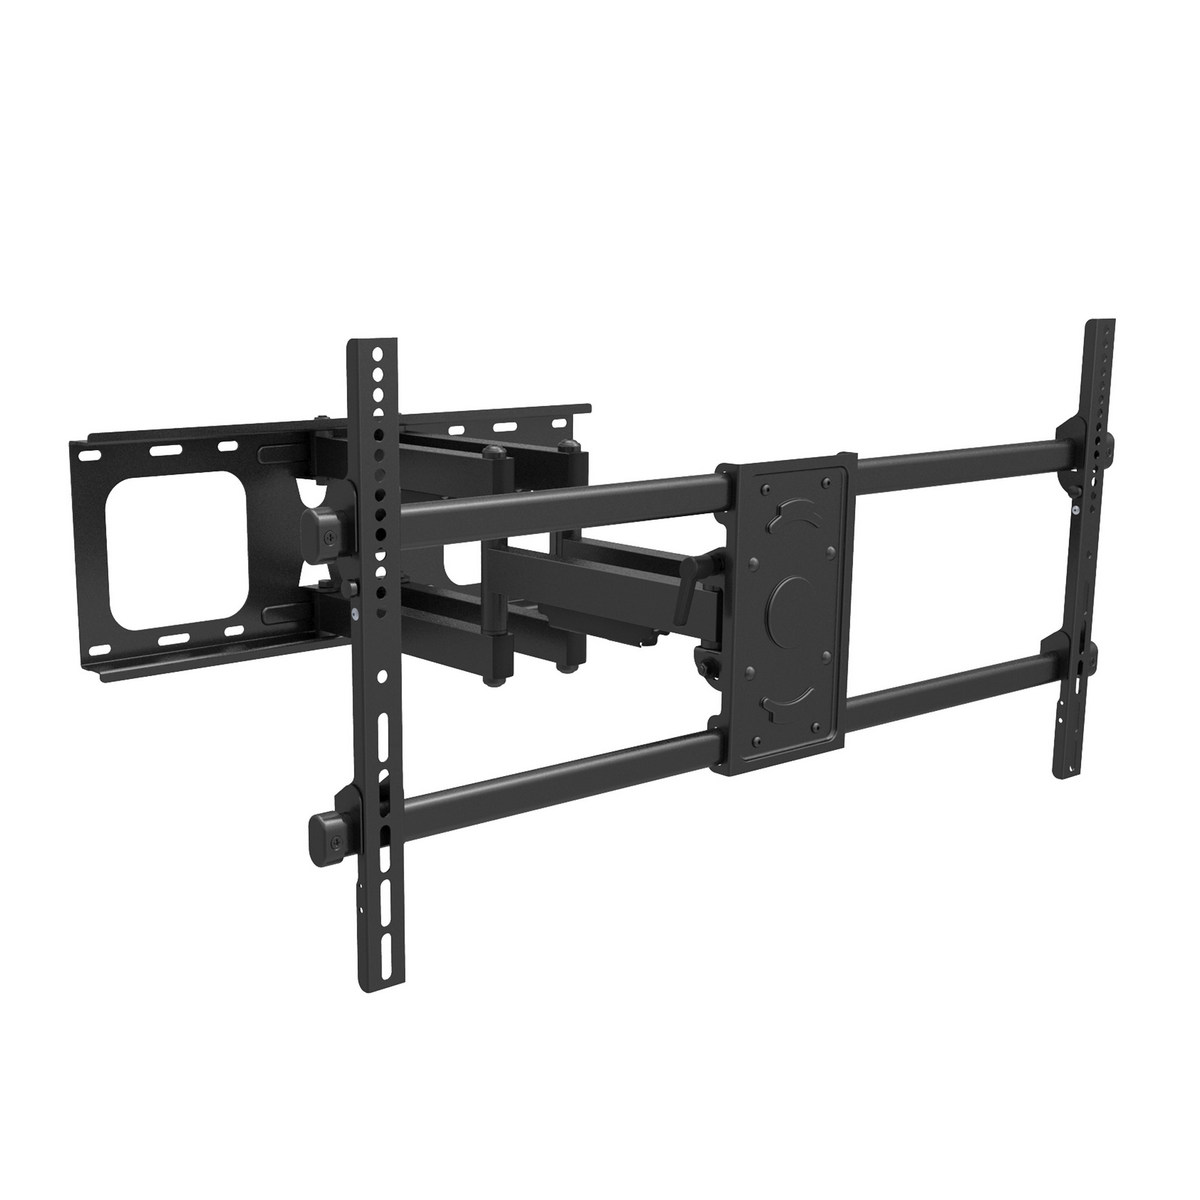 Corliving Mpm-802-a Full Motion Flat Panel Wall Mount For Tvs Up To 90"